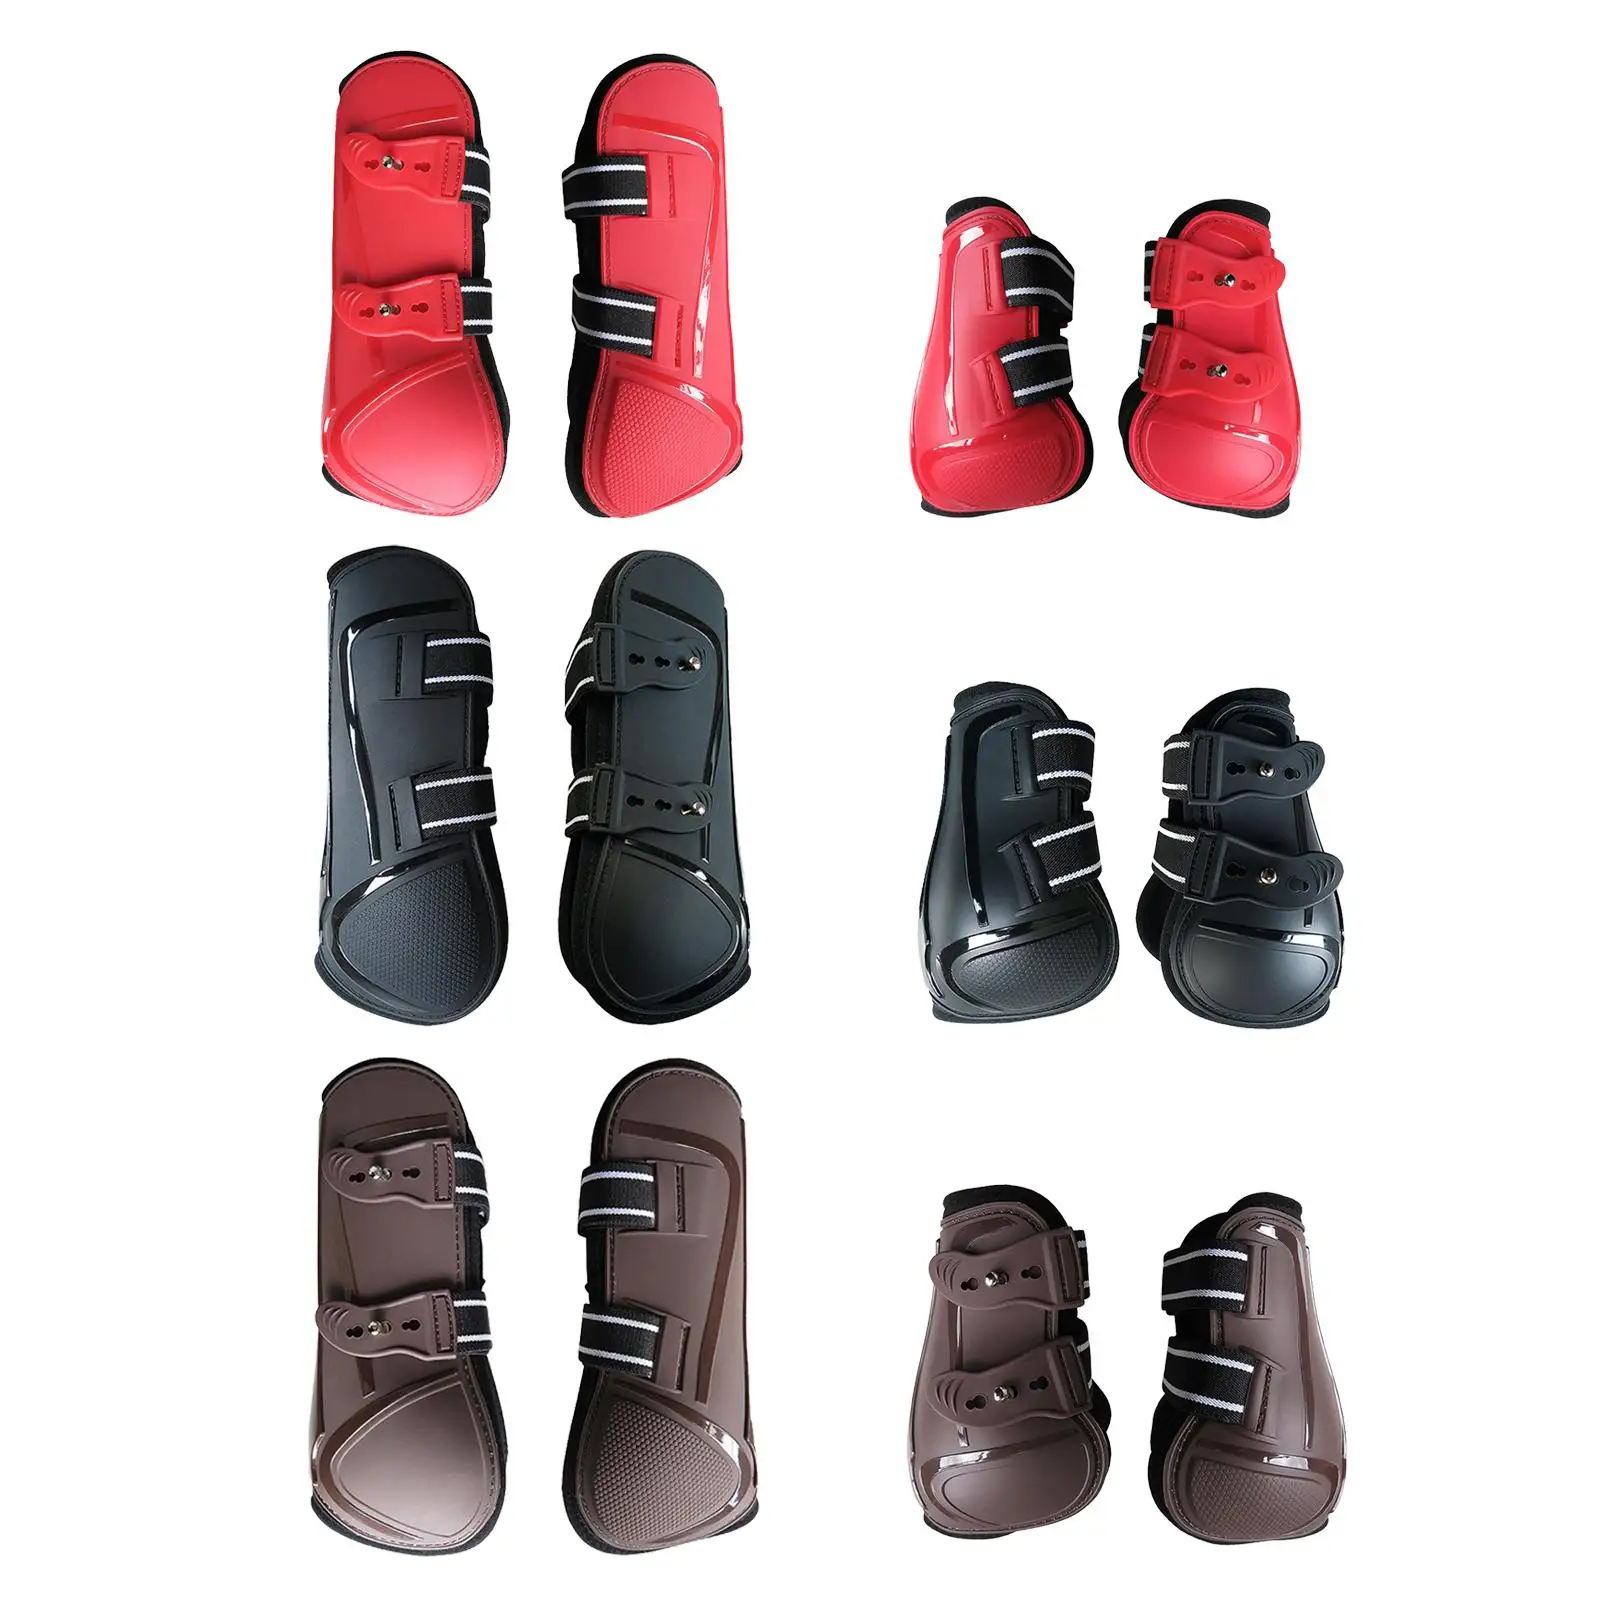 1 Tendon Boots Front/Hind Legs Riding Competition